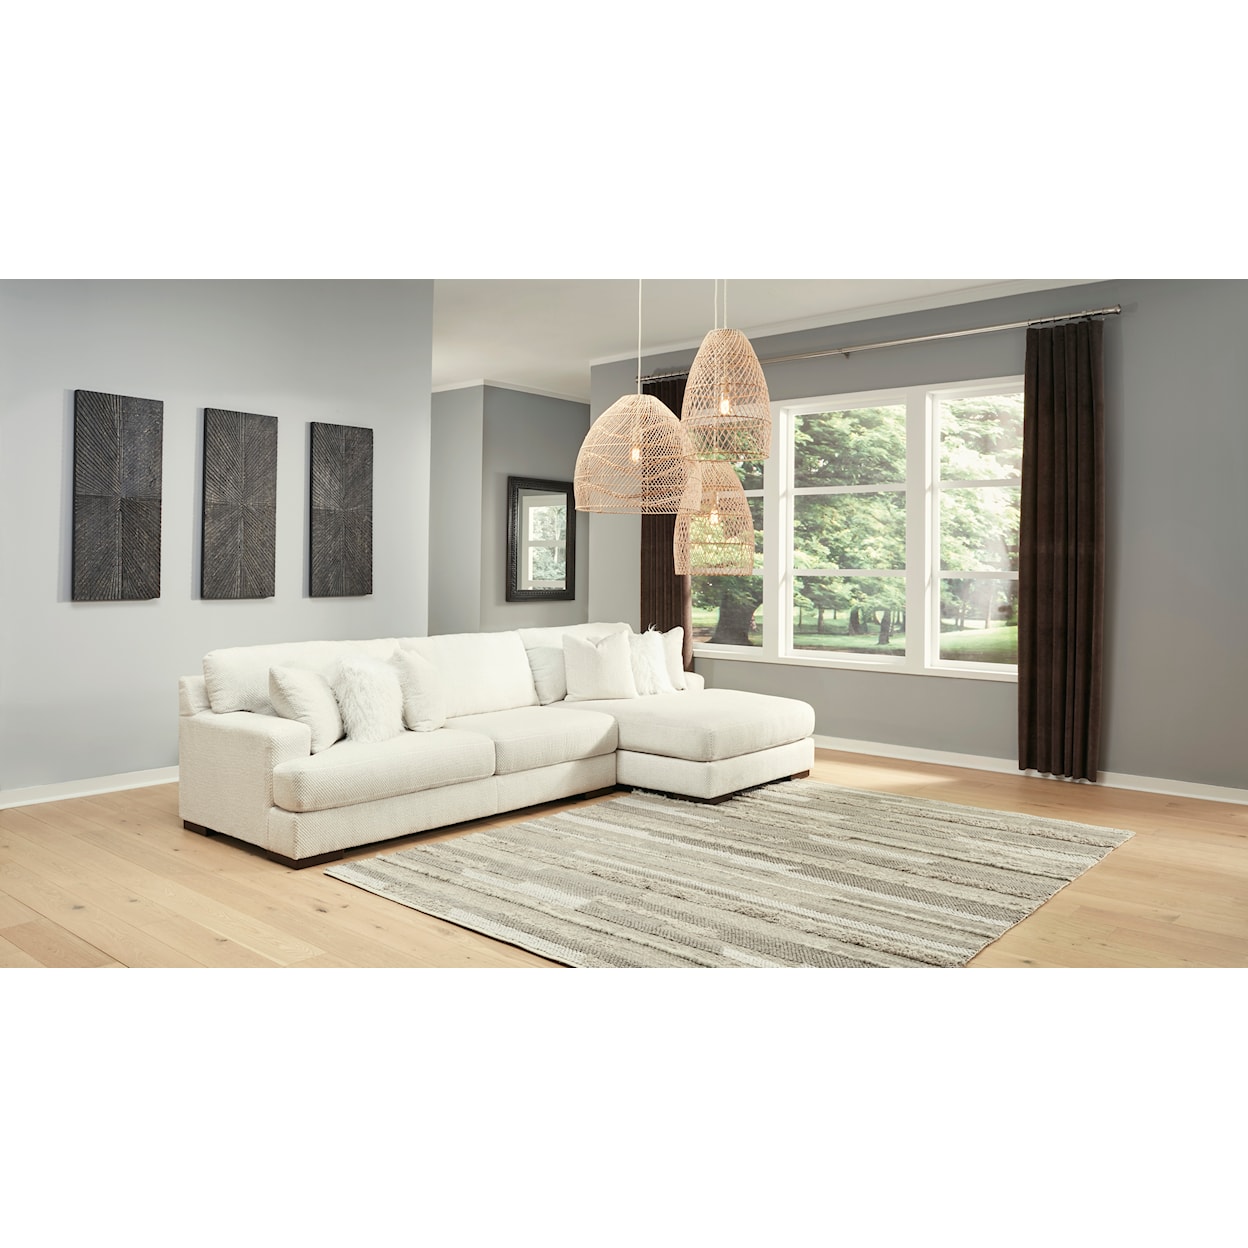 Ashley Furniture Signature Design Zada 2-Piece Sectional with Chaise